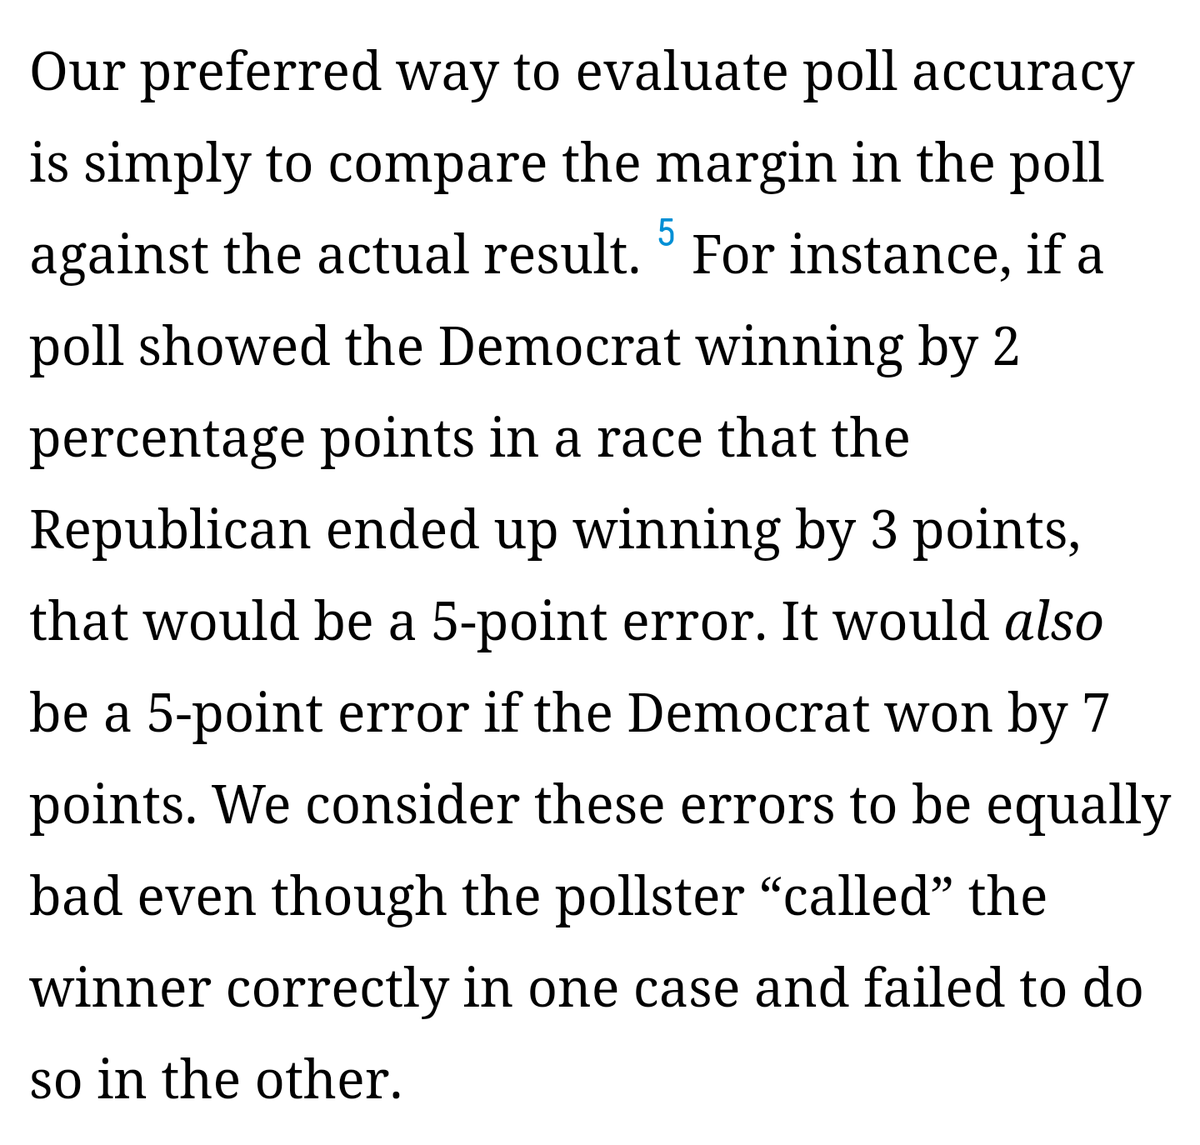 2/xThat's part of why  @FiveThirtyEight's statistically invalid analysis of "poll margin - election margin = poll error" Is so damaging. Not only is it logically and statistically invalid, it leads them/the public to believe the POLLS were wrong when that's likely not true.